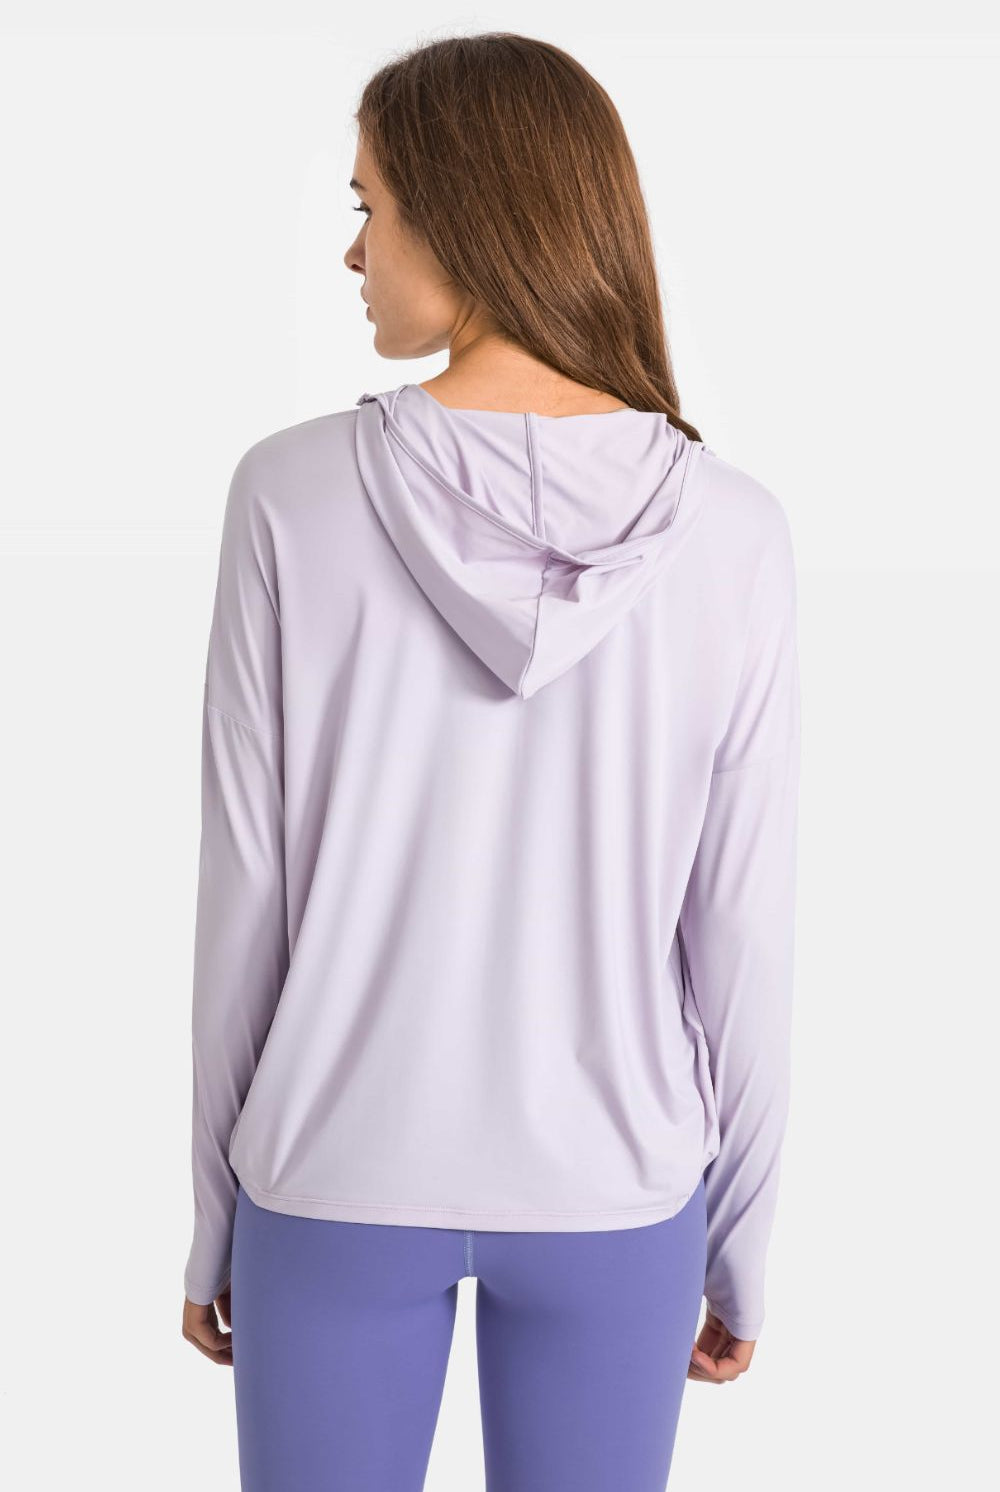 Lavender Sweat Now Shine Later Zip Up Dropped Shoulder Hooded Sports Jacket activewear